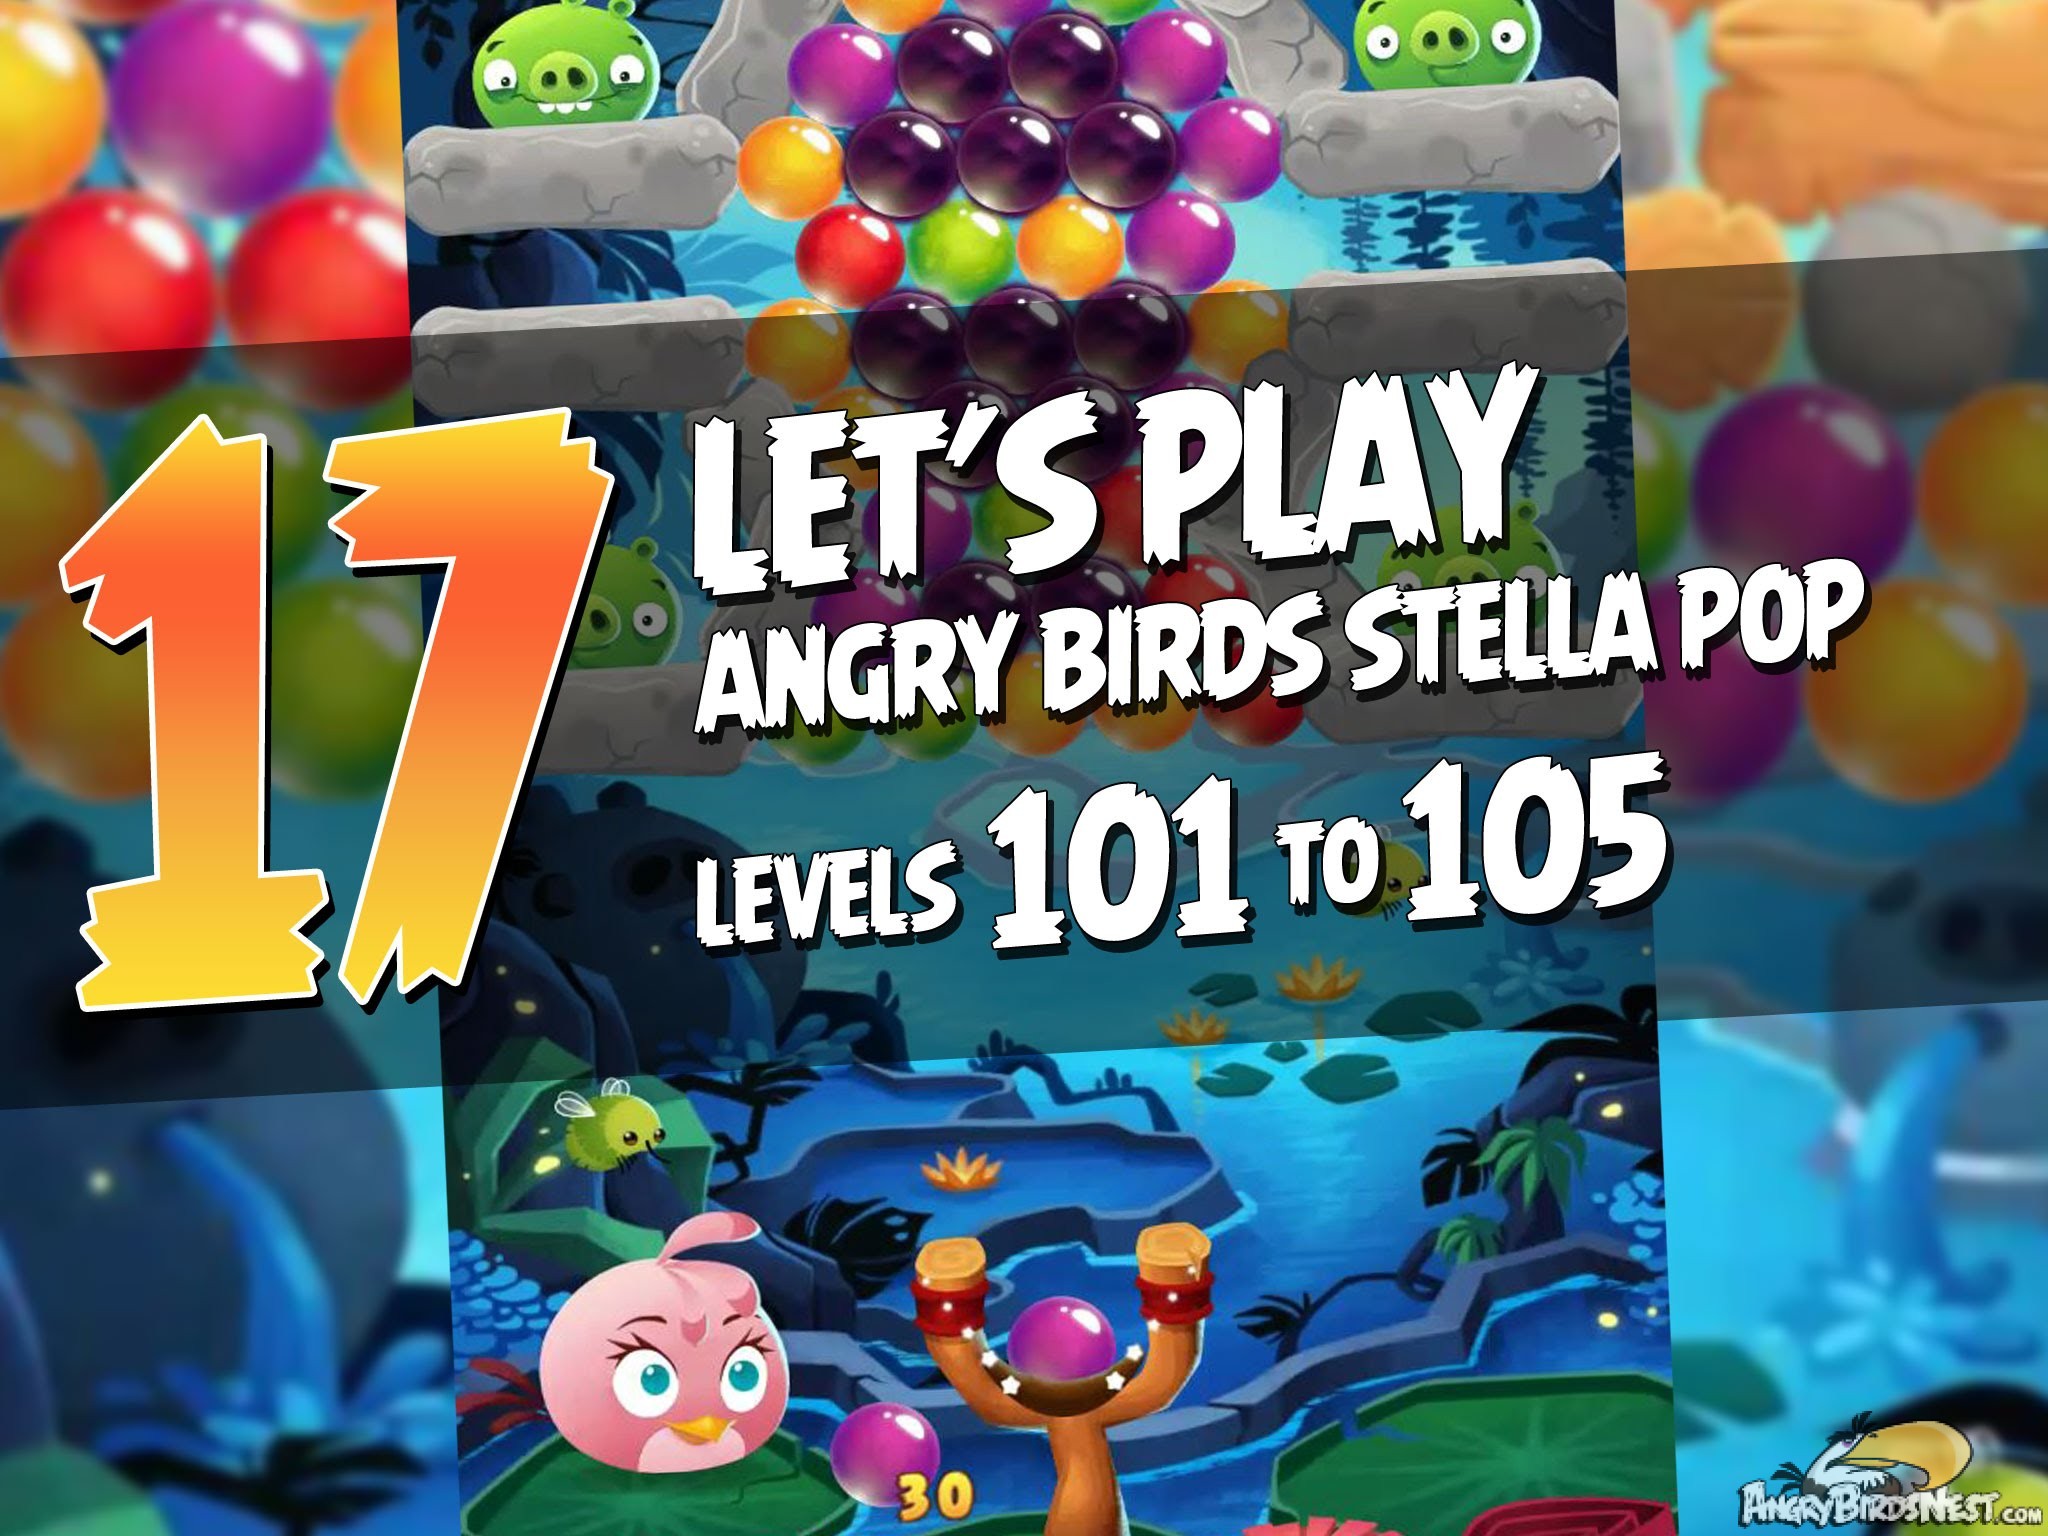 Angry Birds Stella Pop Featured Image Levels 101 thru 105